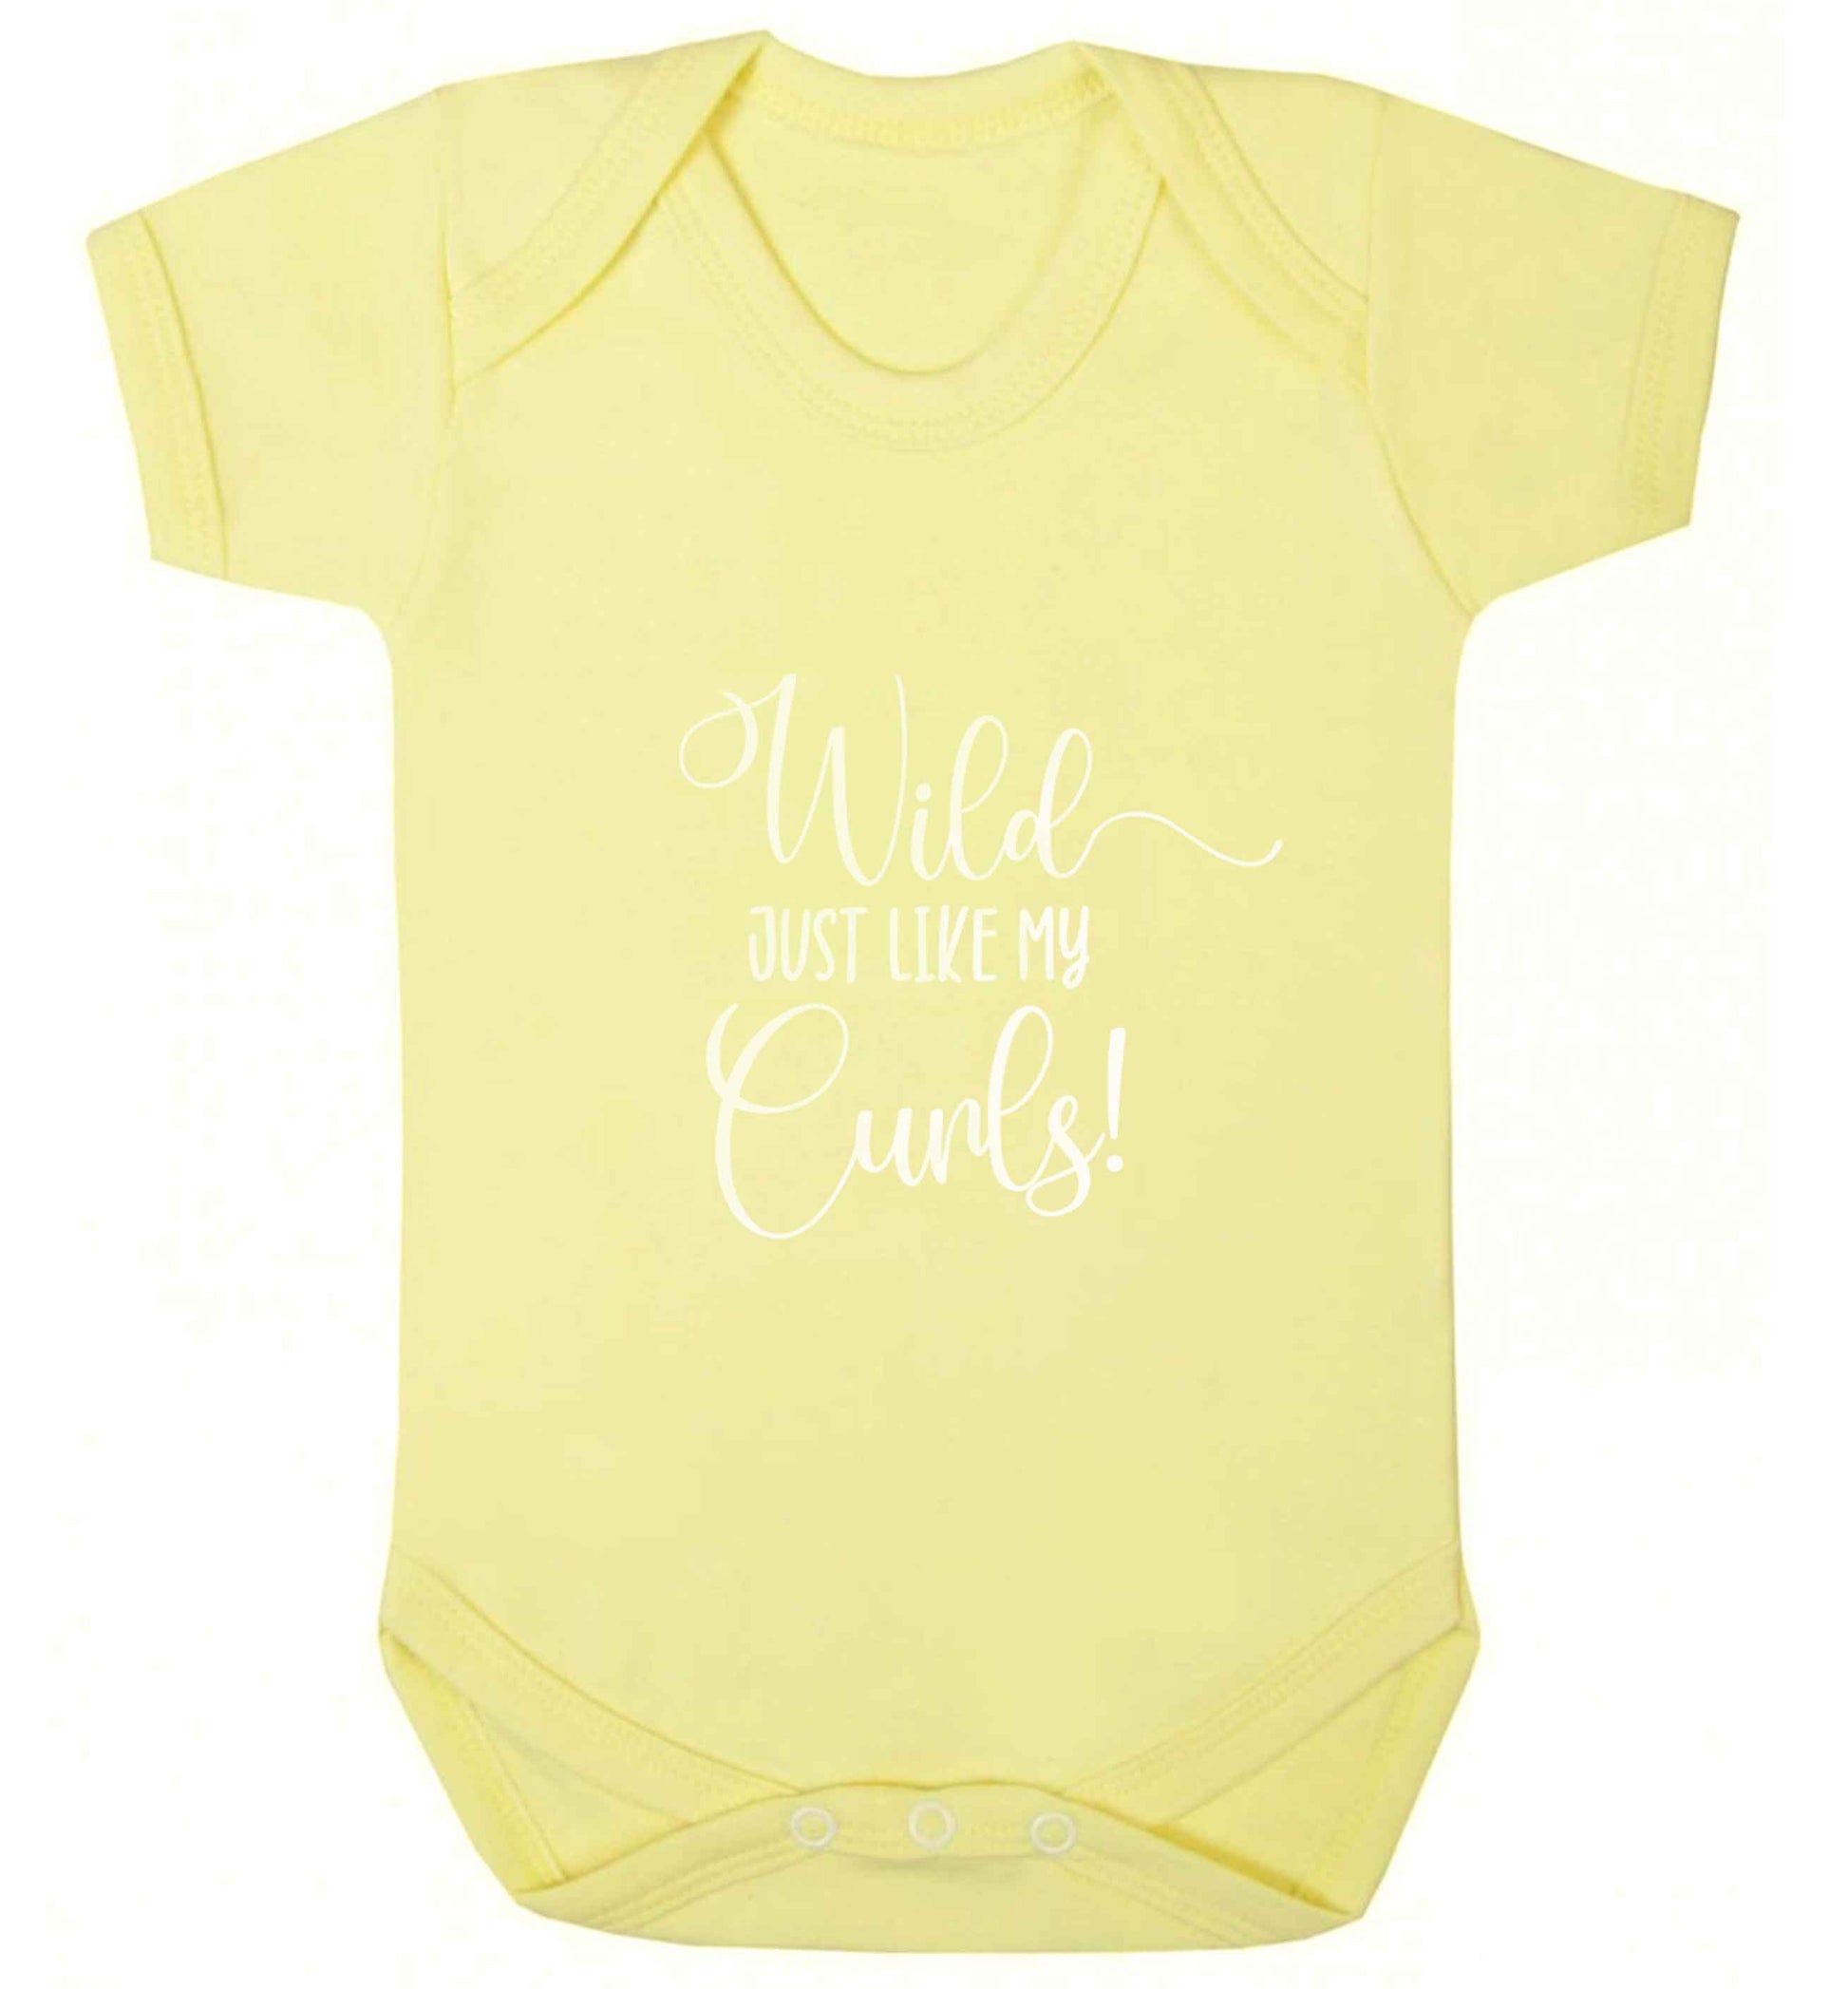 Wild just like my curls baby vest pale yellow 18-24 months